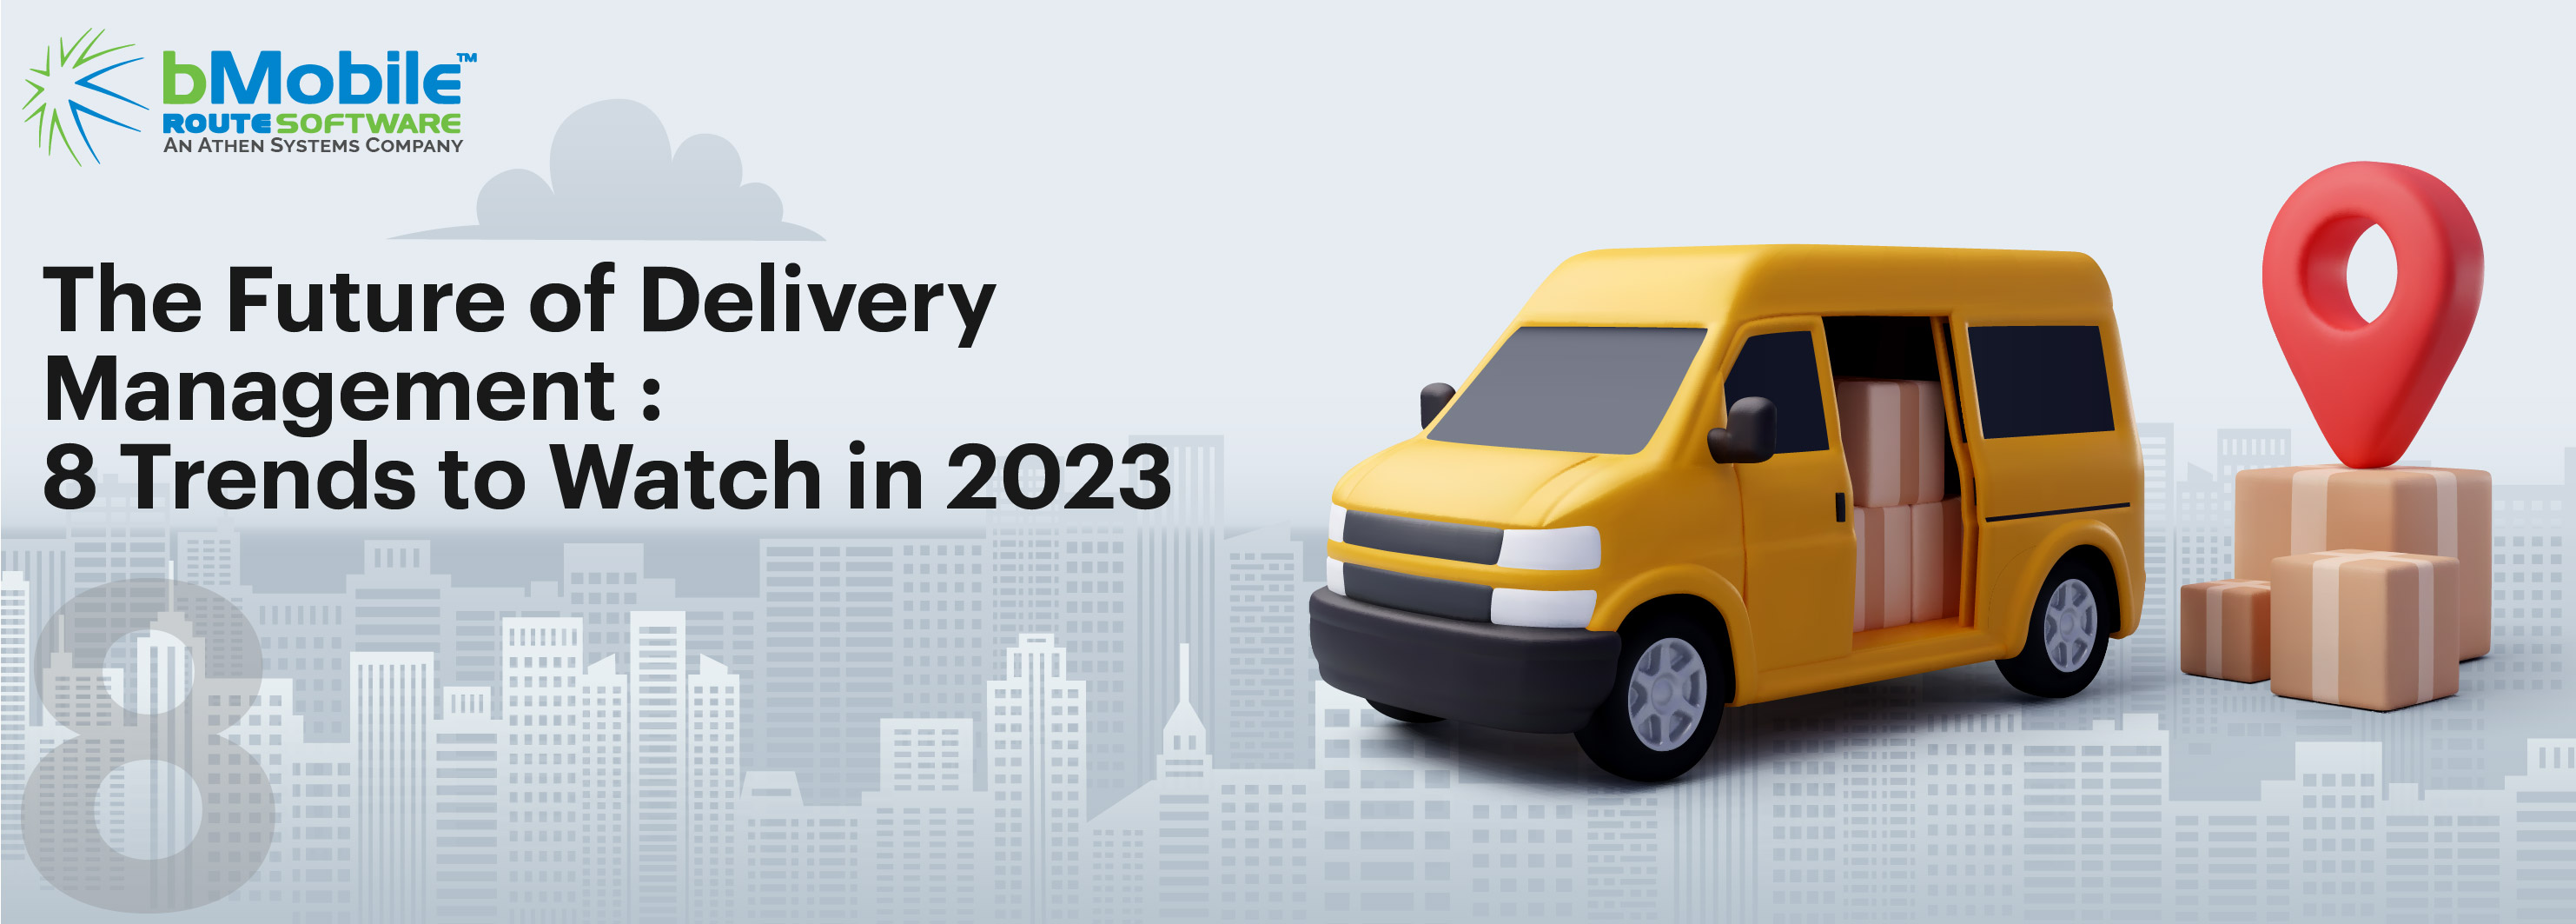 The Future of Delivery Management: 8 Trends to Watch in 2023